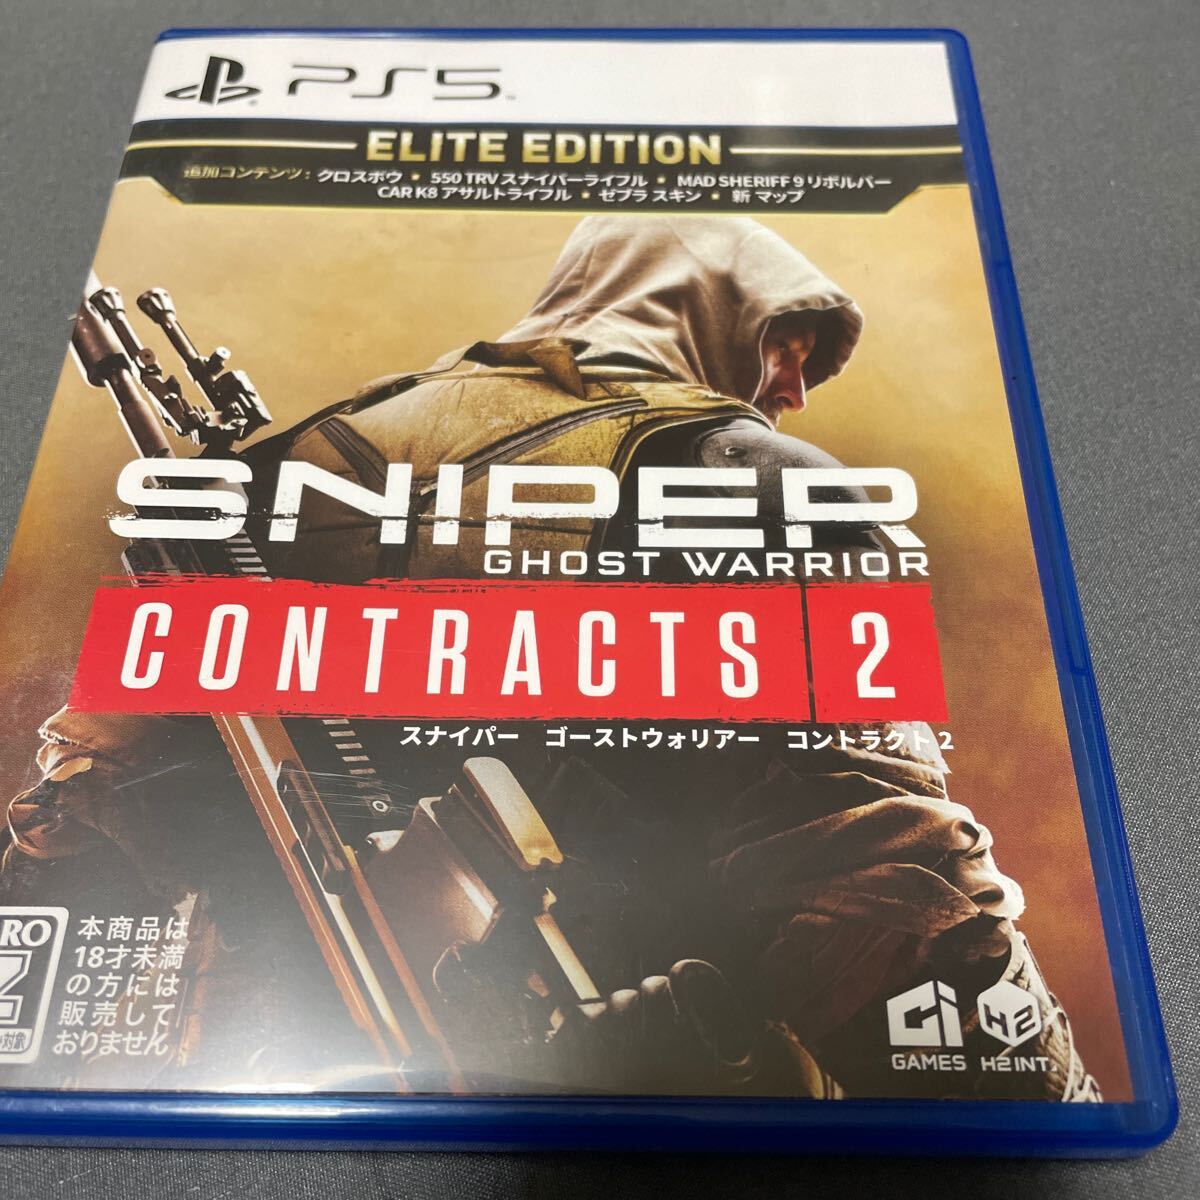 PS5ソフト Sniper Ghost Warrior Contracts 2 Elite Edition スナイパー 中古の画像1